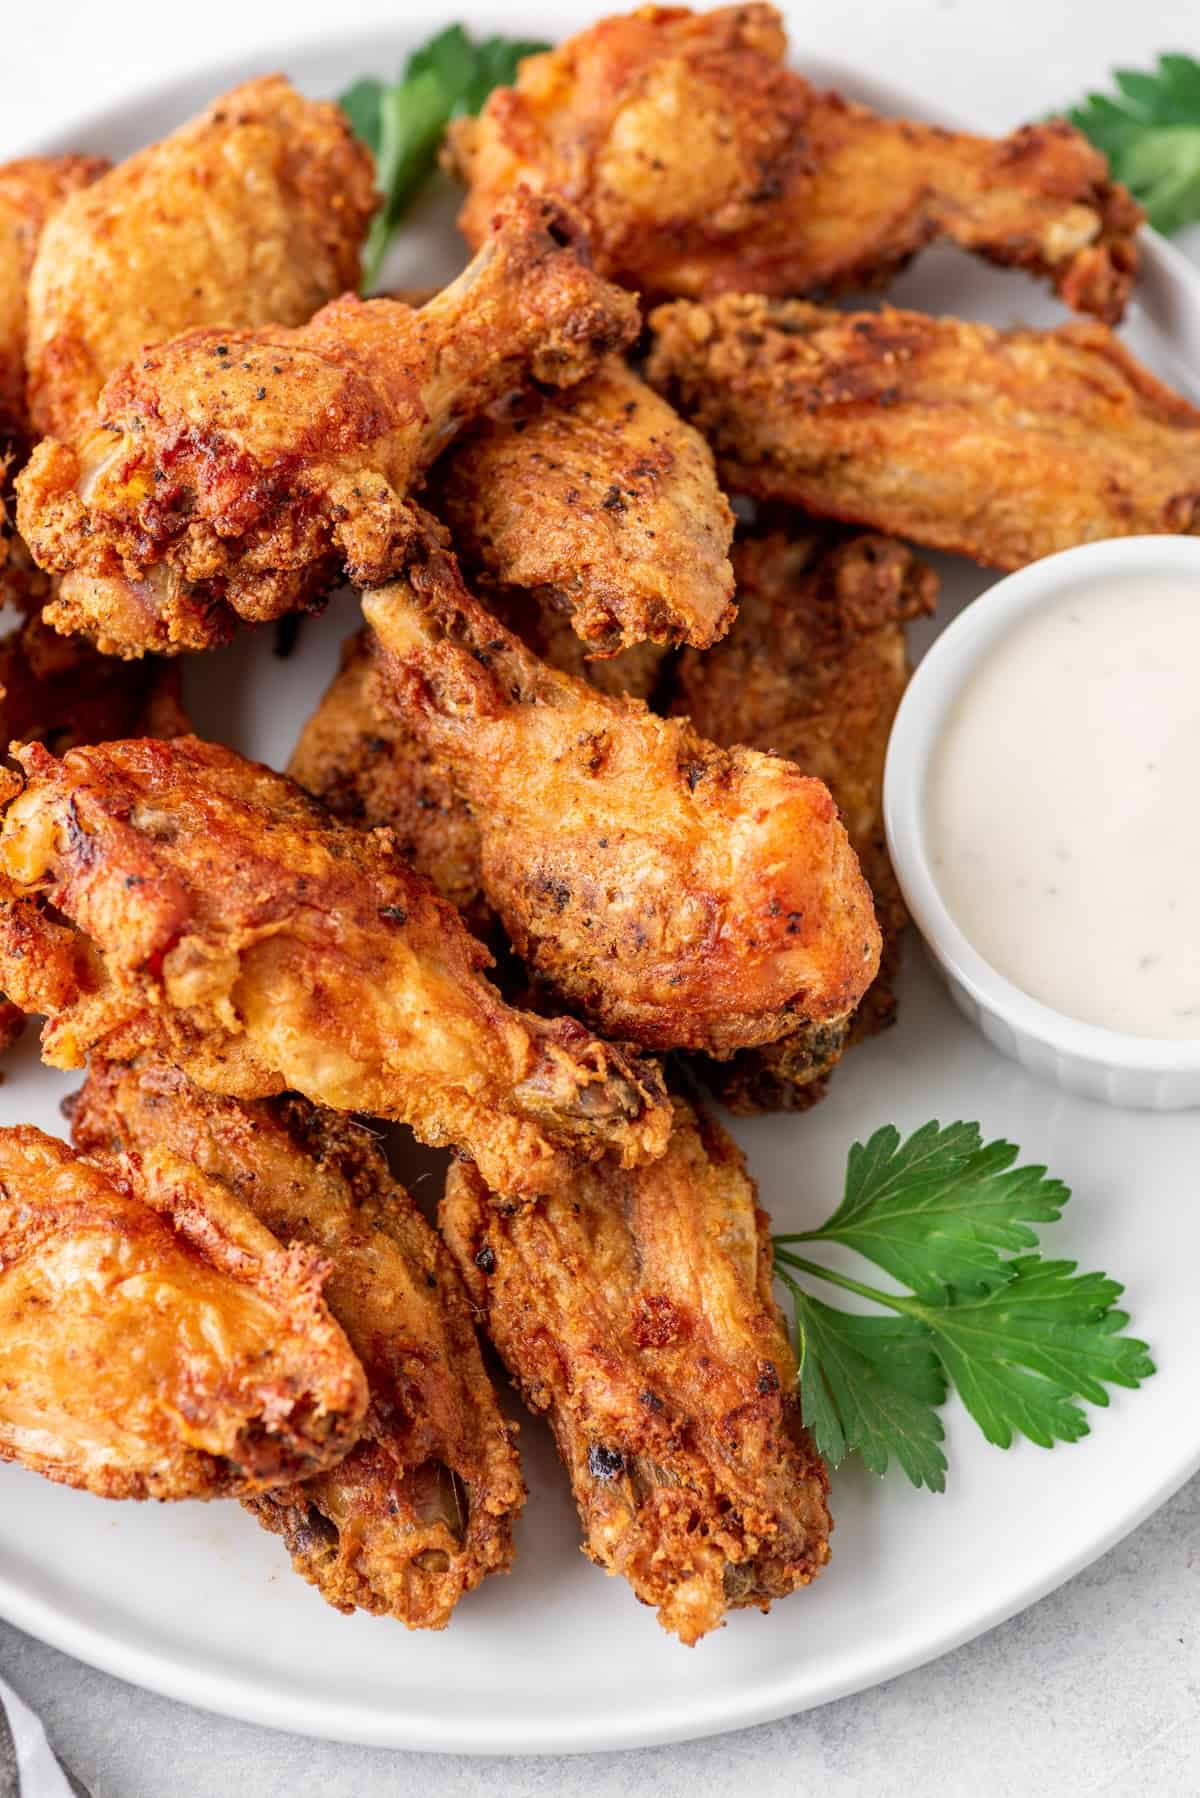 A plate of wings with a garnish of parsley and a ramekin of ranch